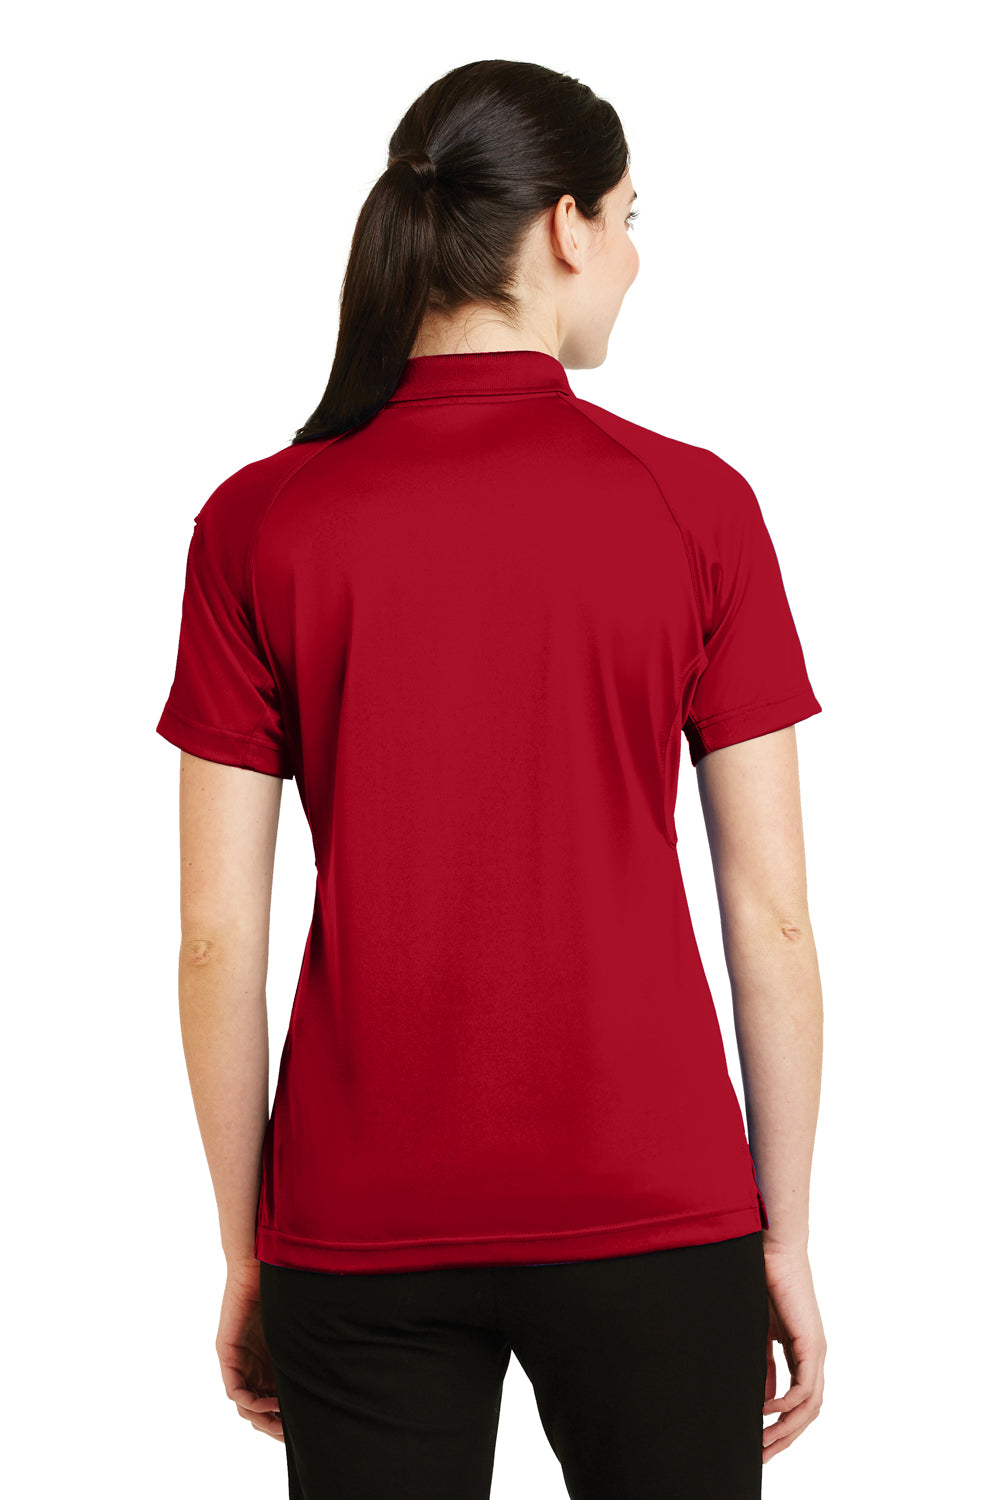 CornerStone CS411 Womens Select Tactical Moisture Wicking Short Sleeve Polo Shirt Red Back